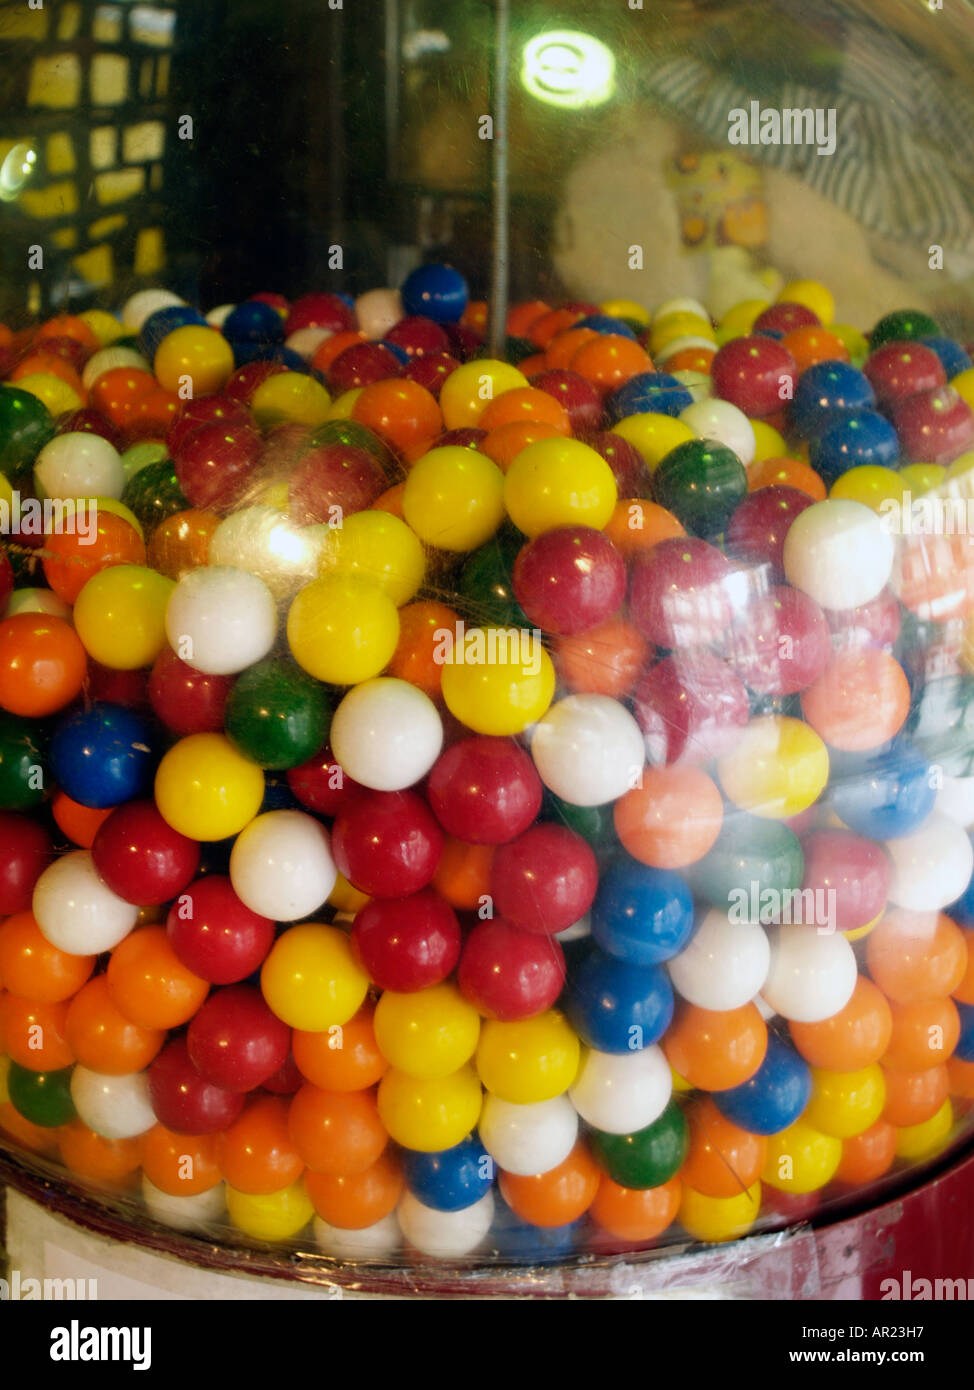 Bubble gum machine selling multi coloured balls of containg chewing gum and sweets Barcelona Spain Stock Photo